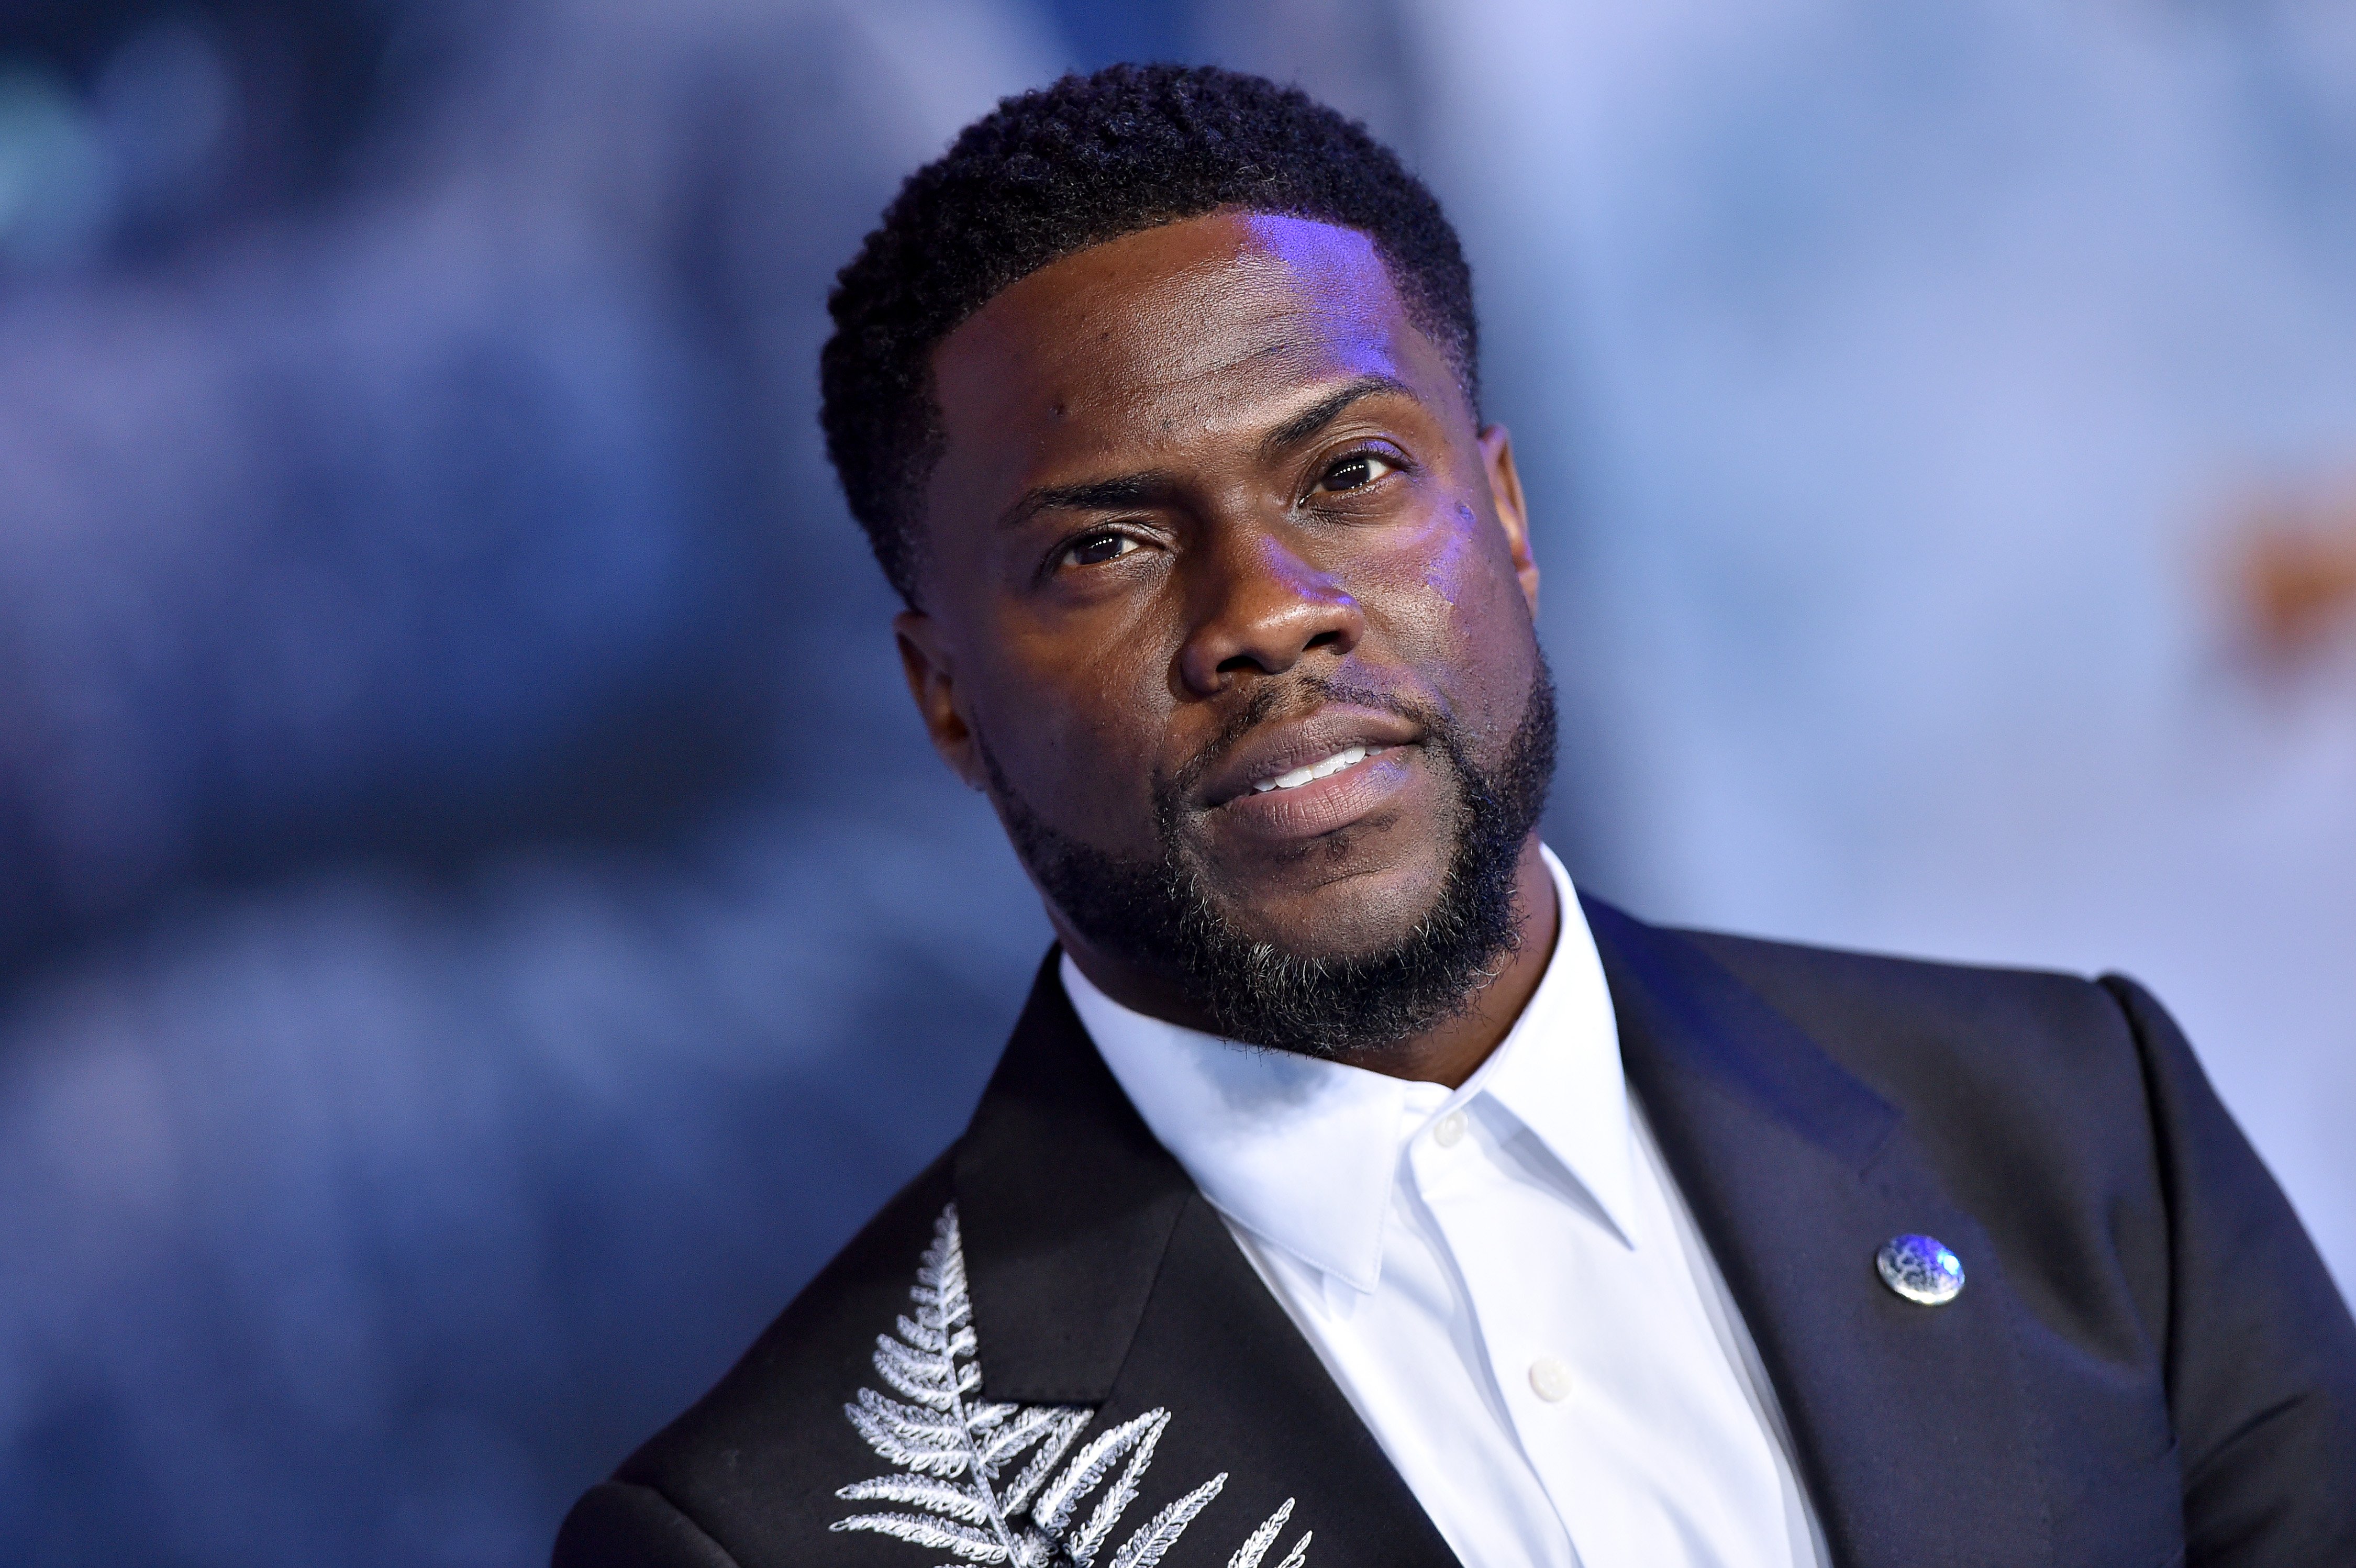 Kevin Hart at the premiere of  "Jumanji: The Next Level" on December 09, 2019 in Hollywood, California.| Source: Getty Images